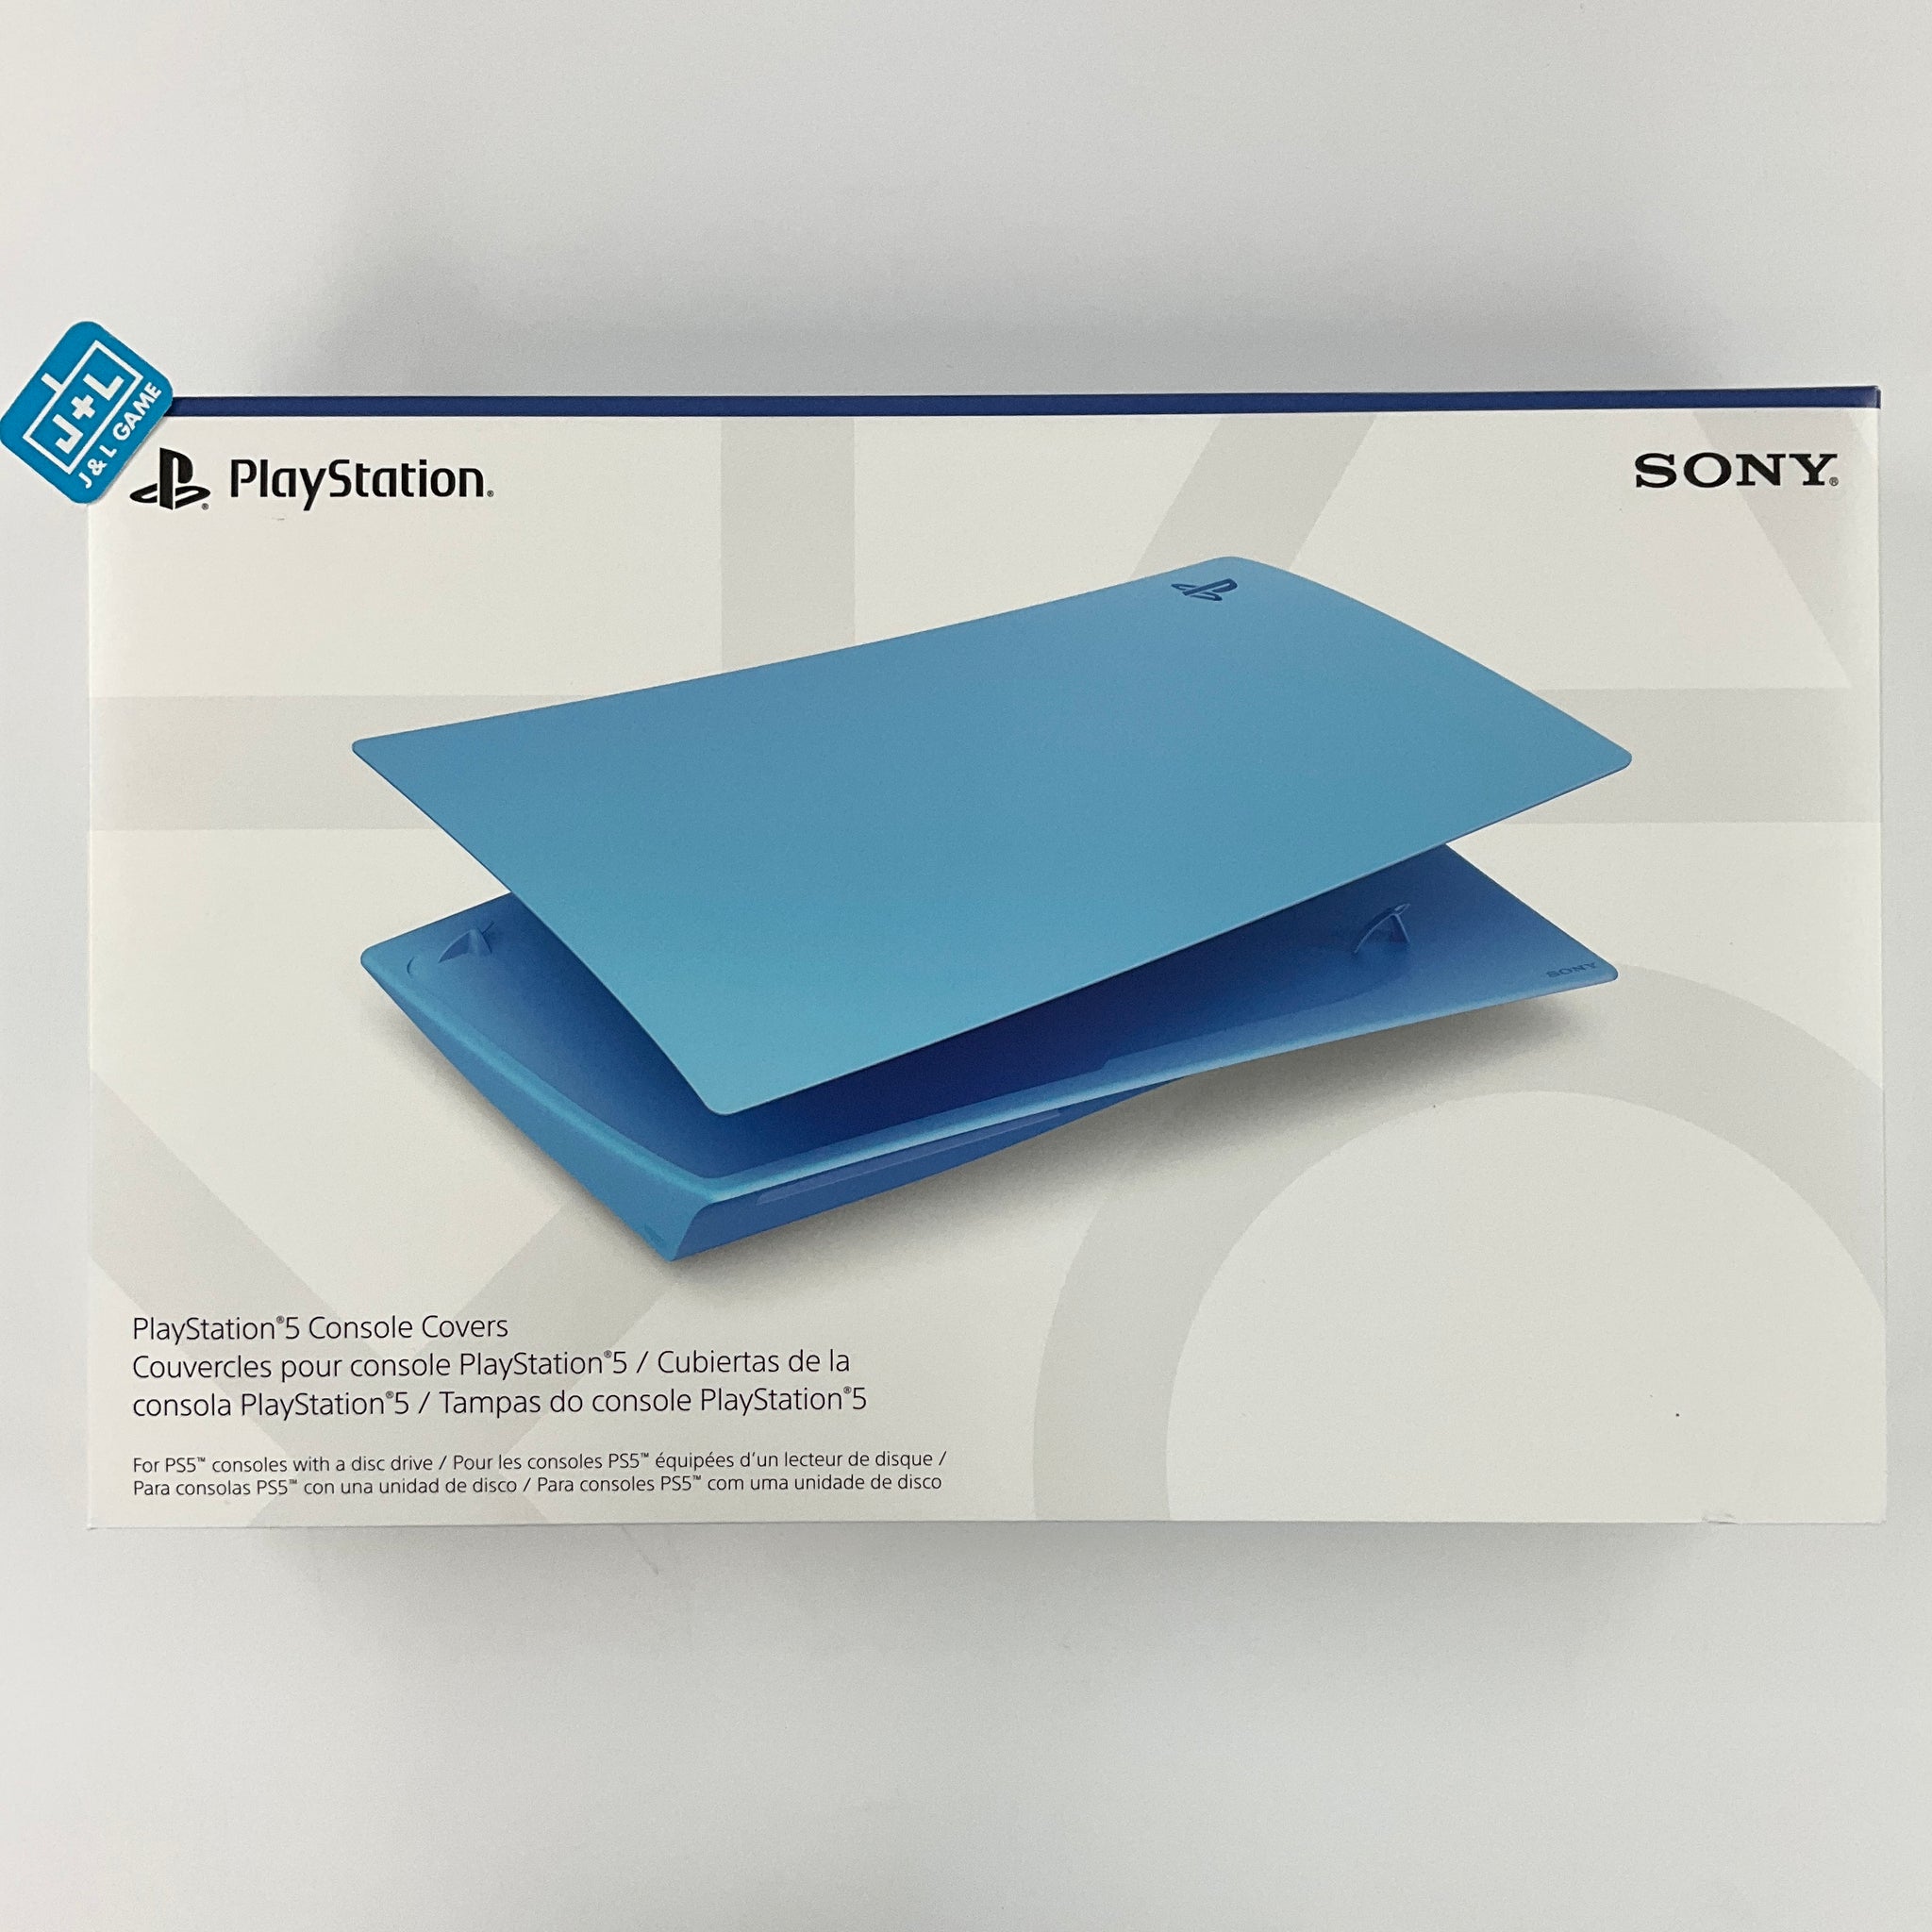 Sony PlayStation 5 DISC Console Cover  (Starlight Blue)  - (PS5) Playstation 5 Accessories Sony   